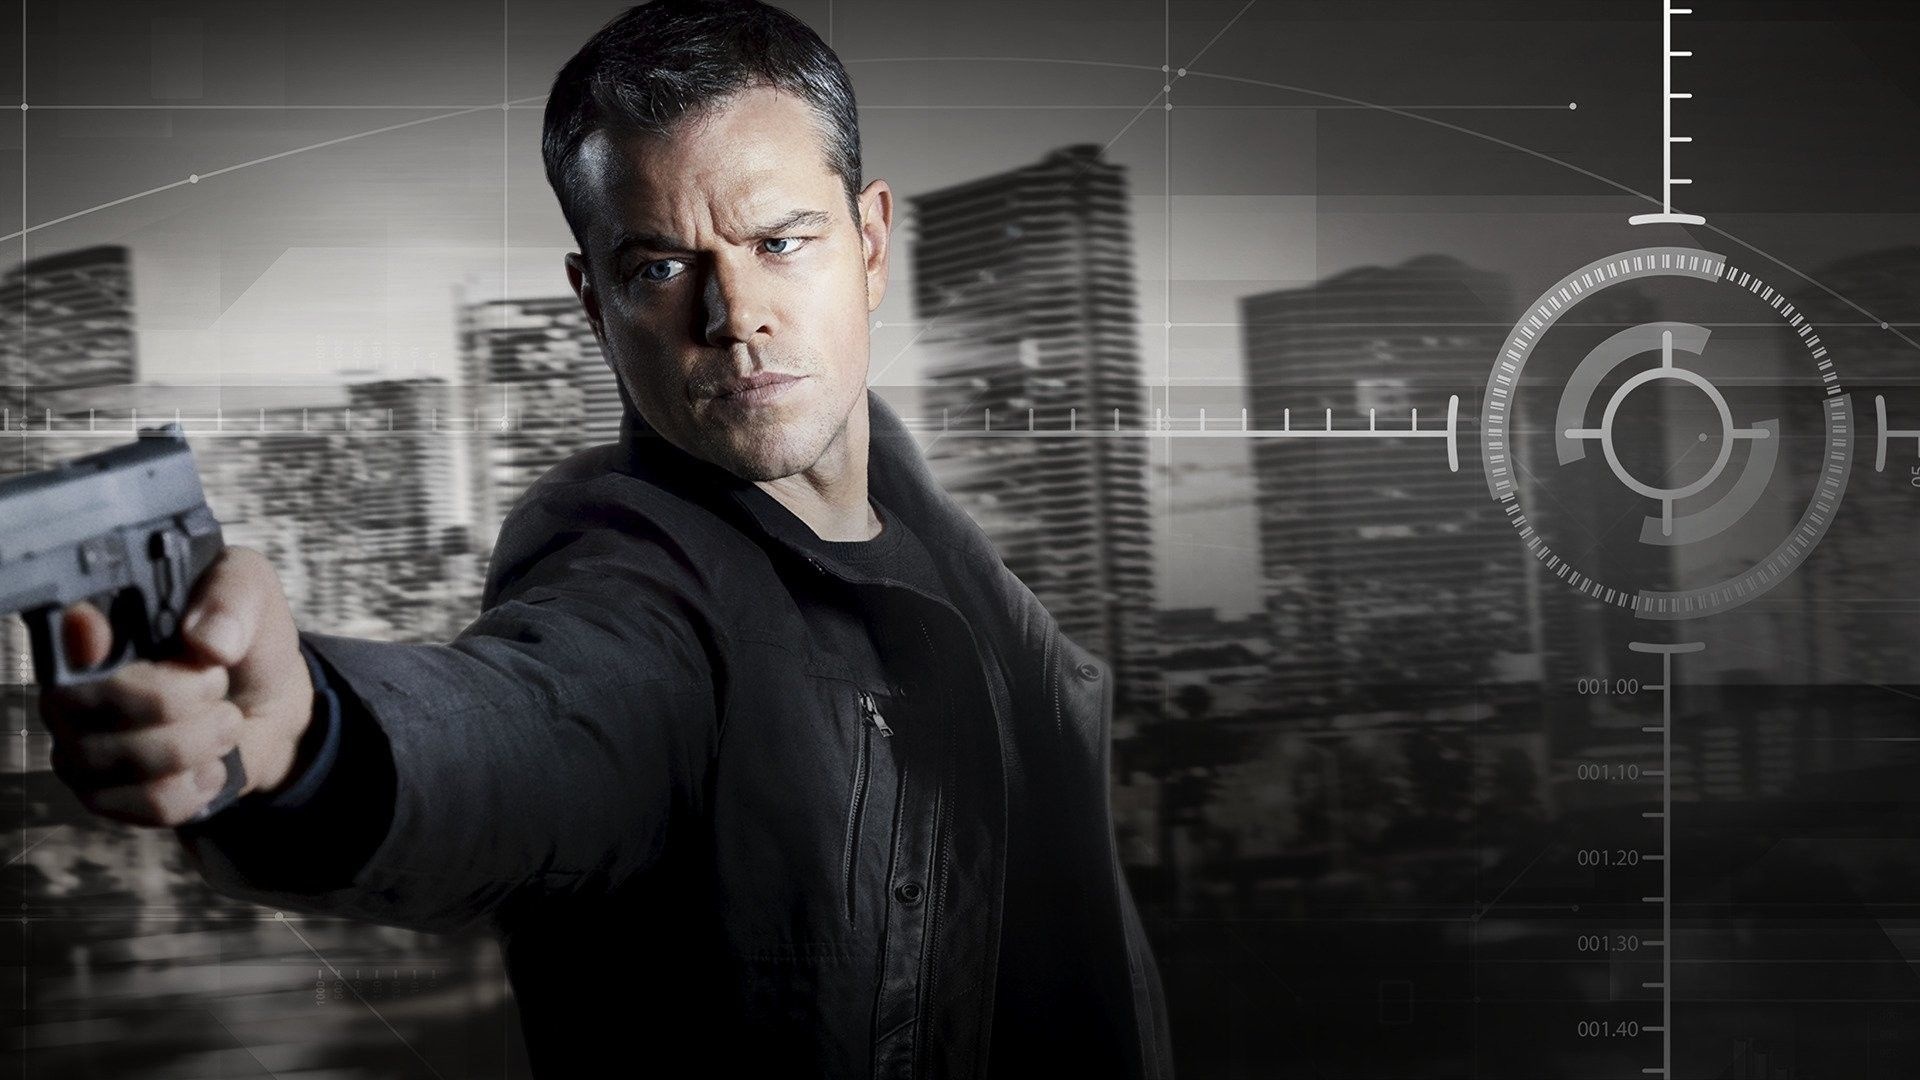 Jason Bourne, Top free backgrounds, The Bourne movies, Spy thriller, 1920x1080 Full HD Desktop